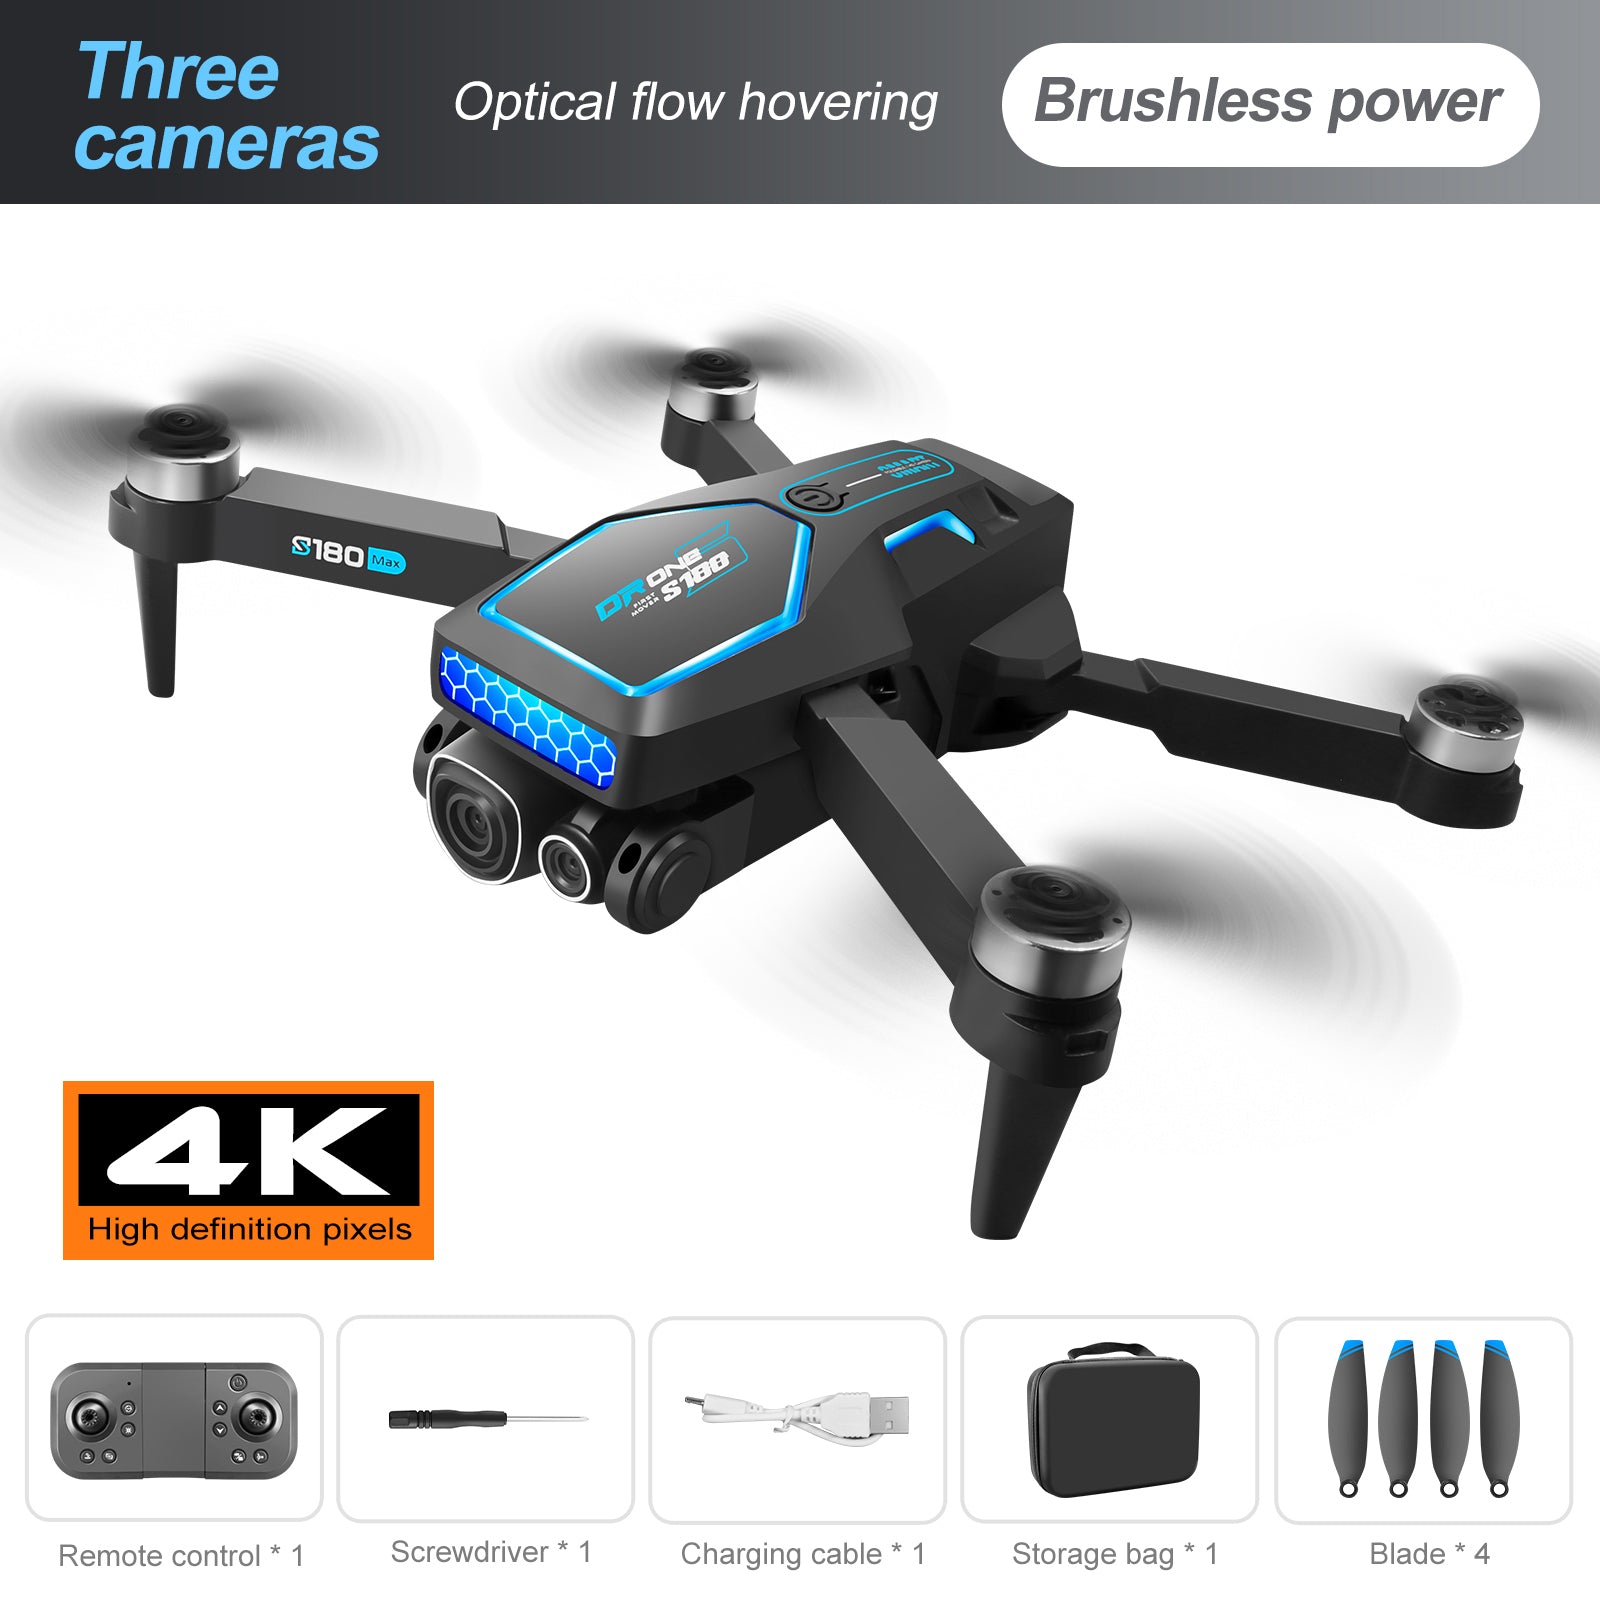 S180 Drone, Drone with optical flow hovering, brushless power, and 0.4K HD camera for aerial photography.